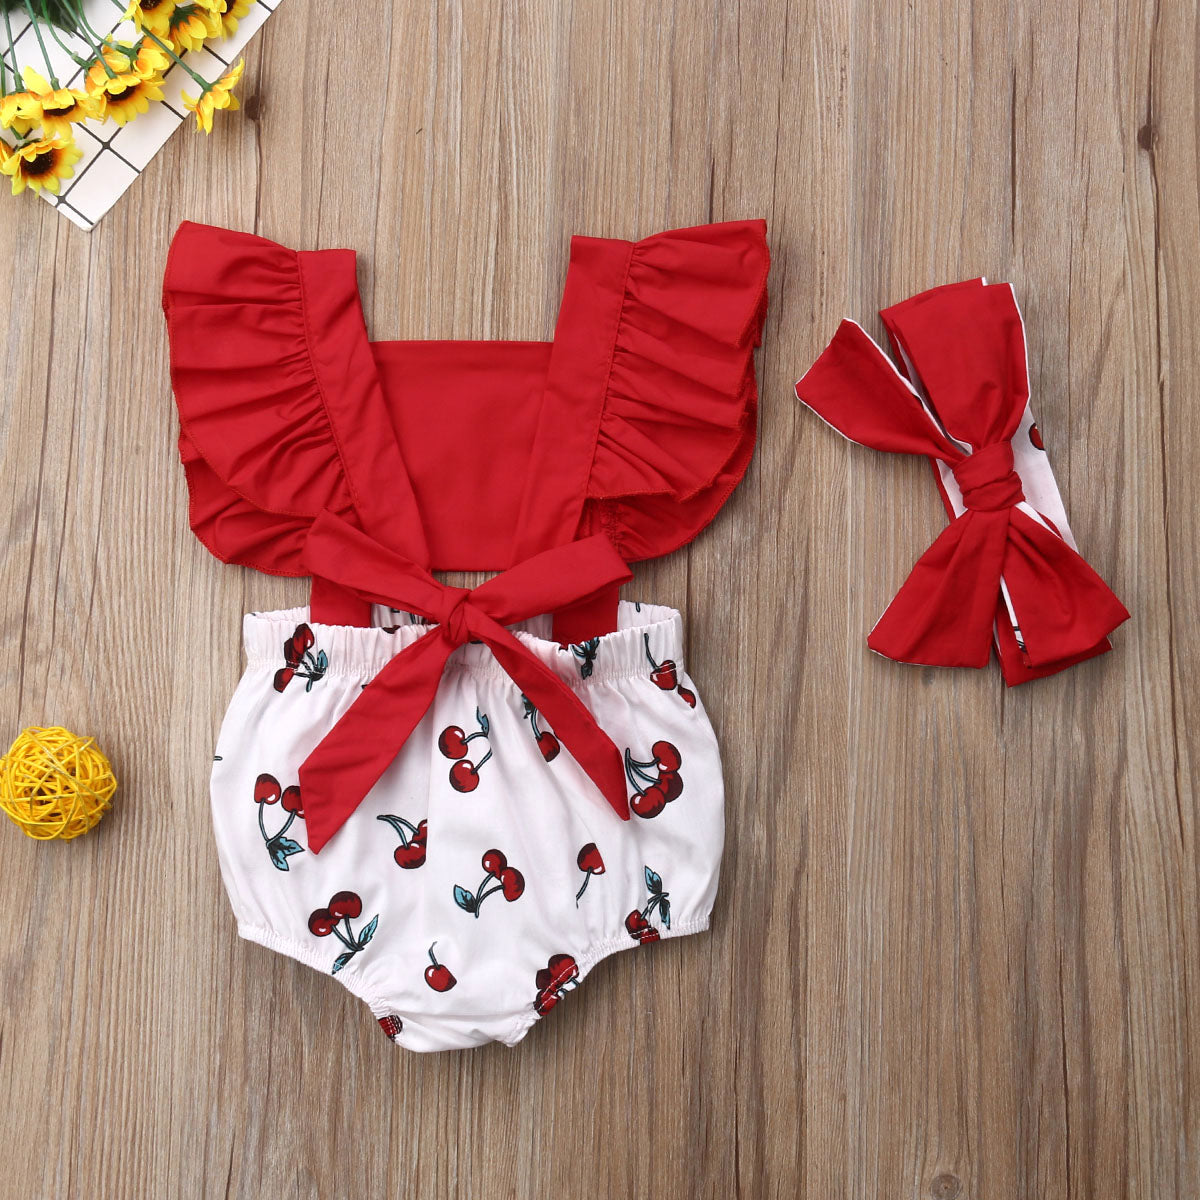 Summertime Romper + Bow Sets | Sleeveless Girls' Outfit itsykitschycoo